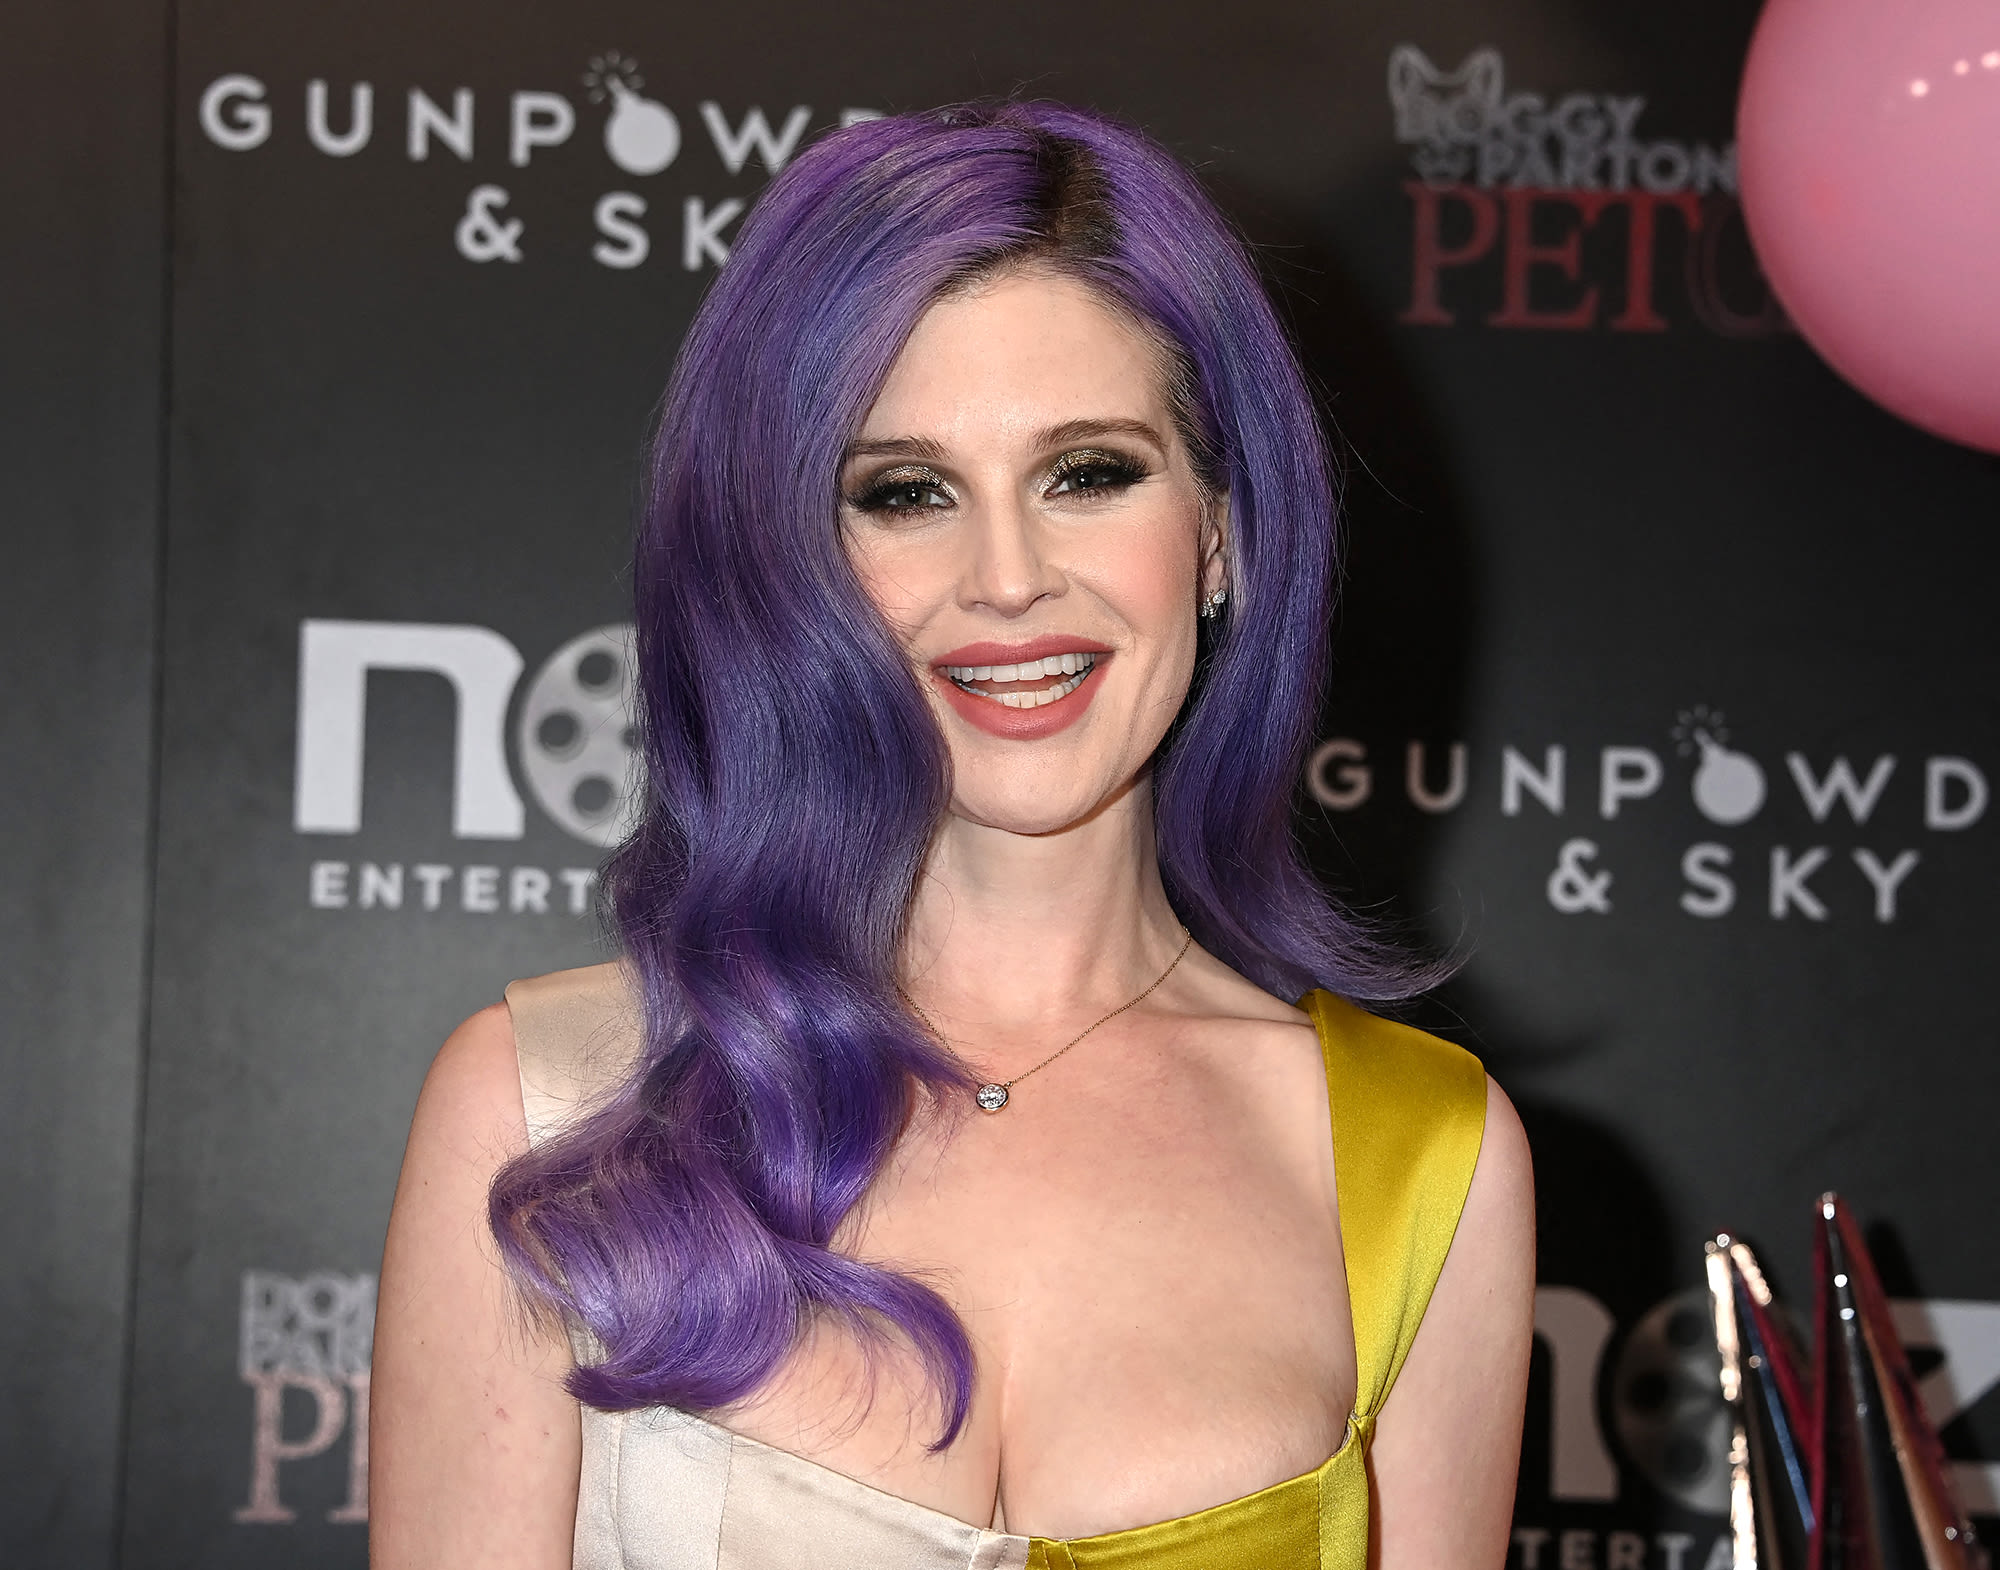 Kelly Osbourne Jokes That Drugs and Alcohol Protect Her From Cancer: ‘I’ve Embalmed Myself’